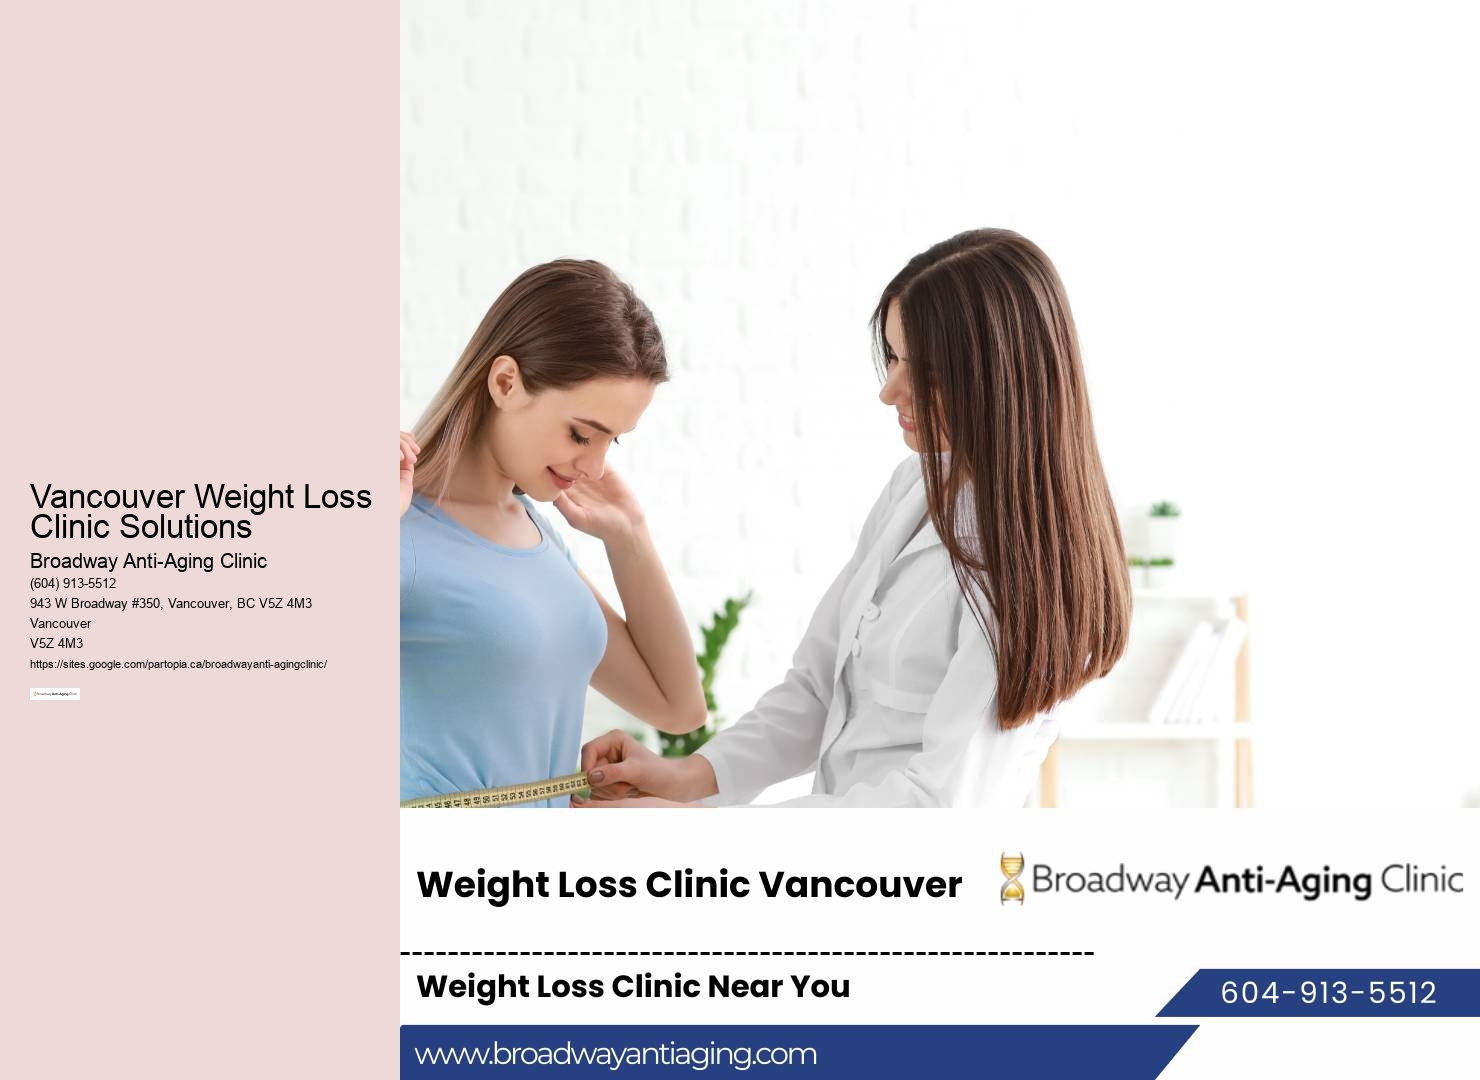 Vancouver Weight Loss Clinic Solutions